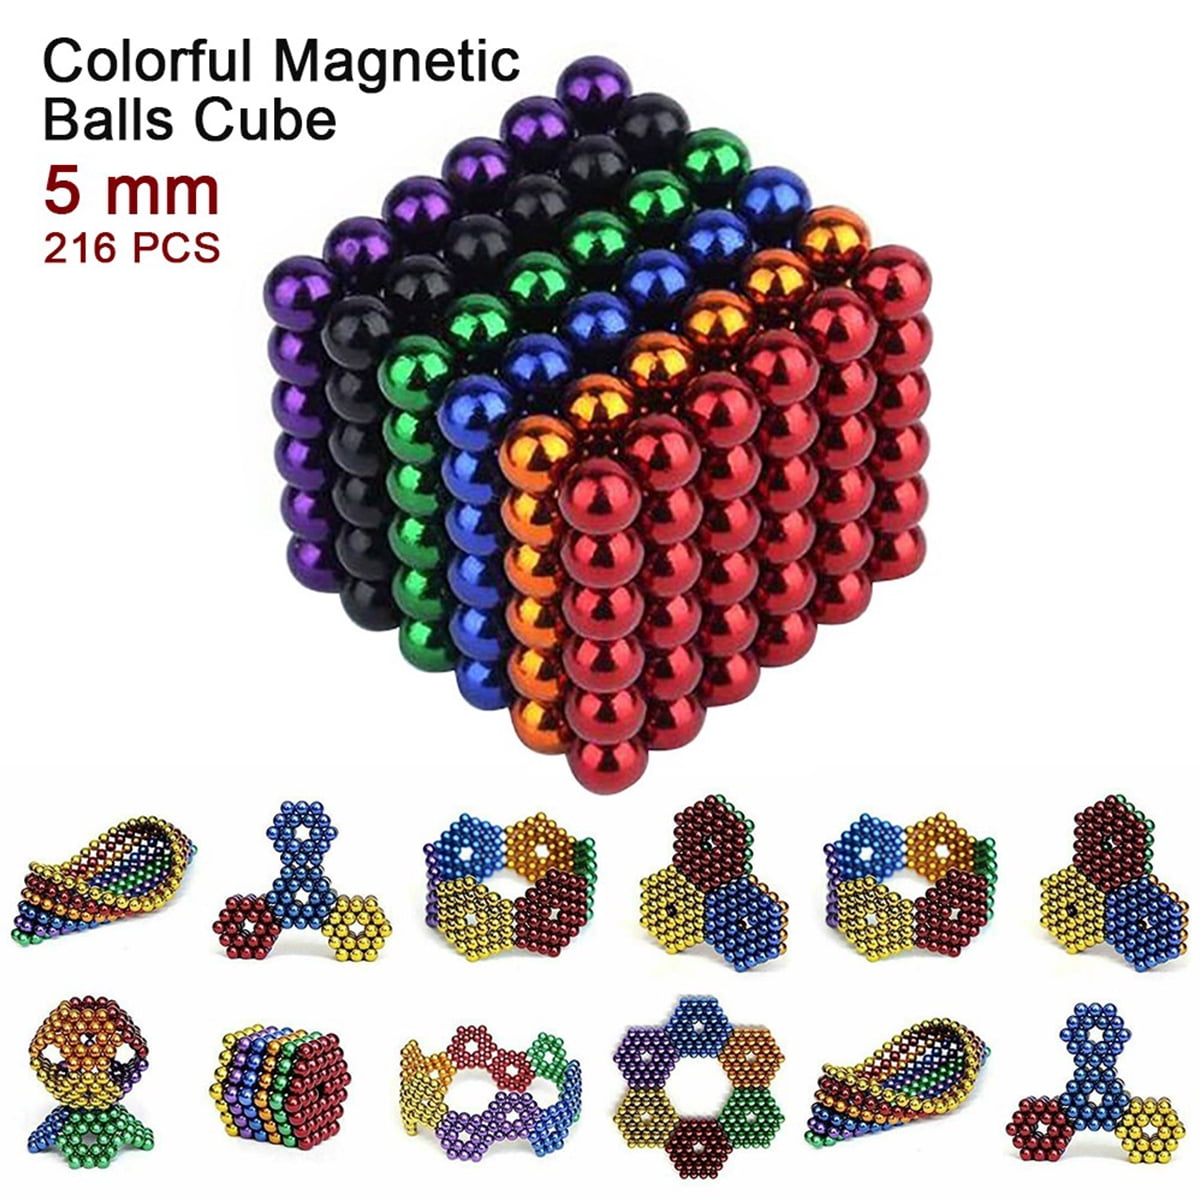 Black SkyMagnets 5 mm Magnetic Balls Cube Fidget Gadget Toys Rare Earth Magnets Office Desk Toy Desk Games Magnet Toys Magnetic Beads Stress Relief Toys for Adults 